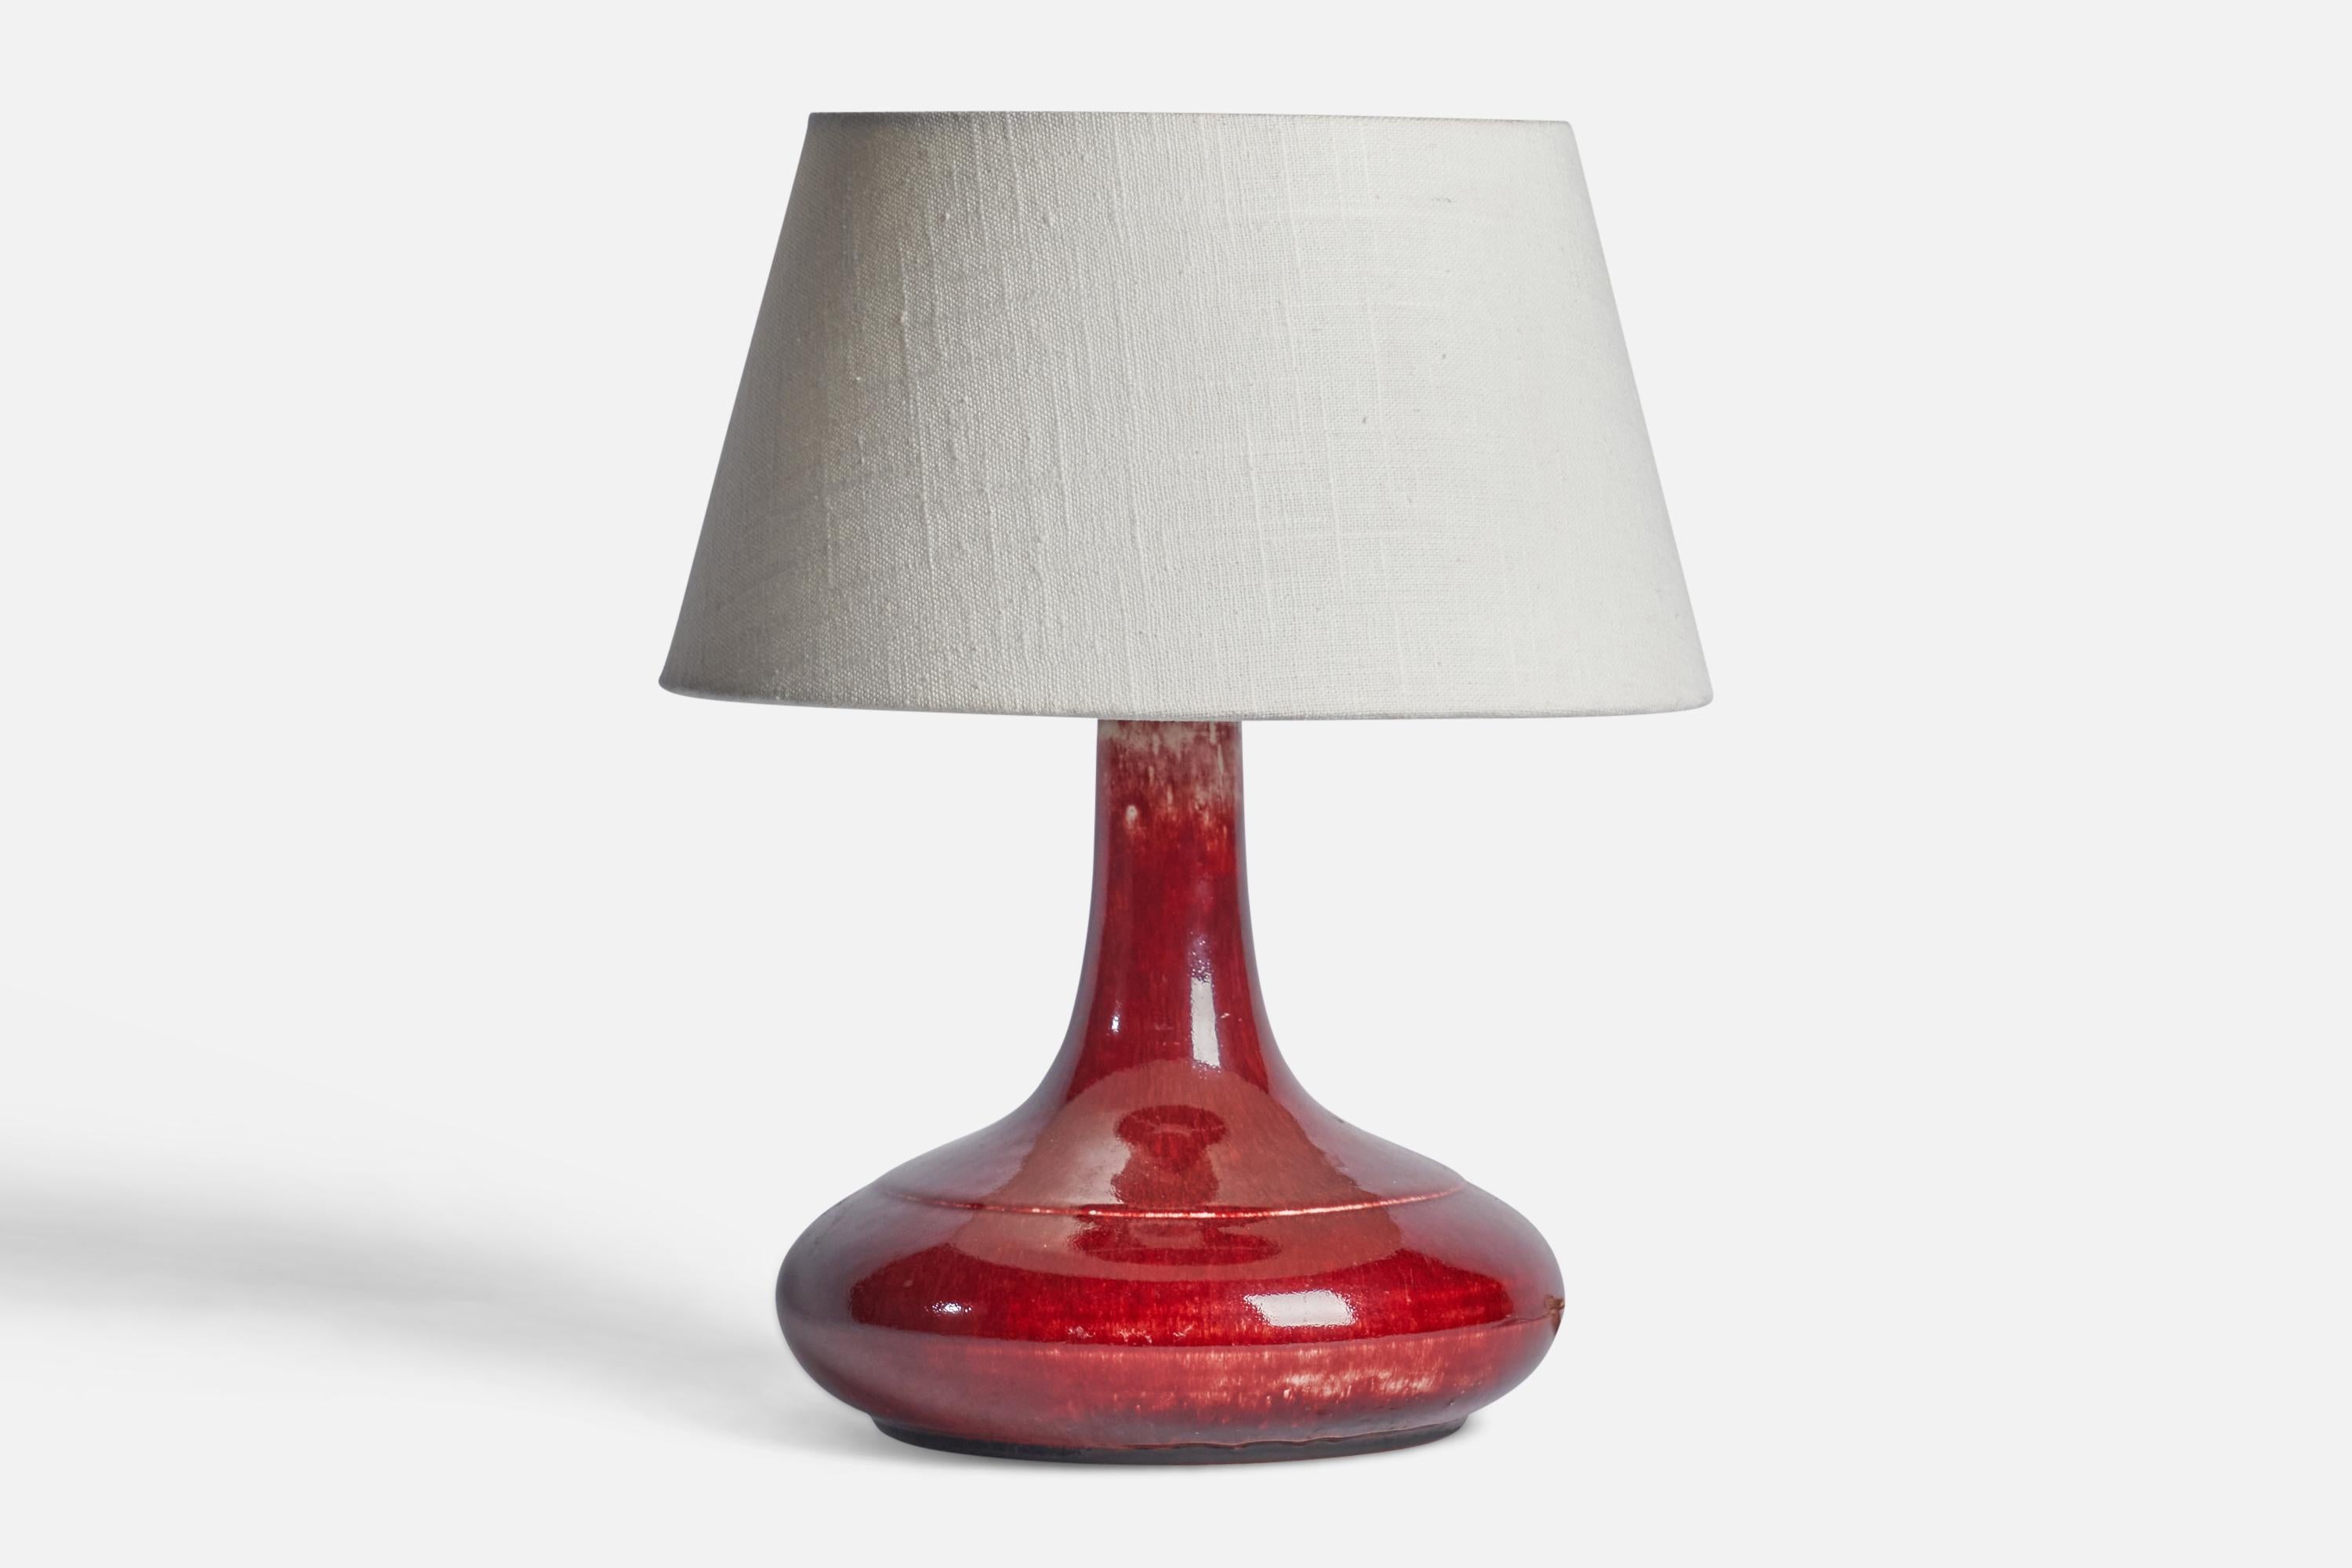 A red-glazed stoneware table lamp designed and produced by Desiree, Denmark, 1960s.

Dimensions of Lamp (inches): 9.5” H x 7.75” Diameter
Dimensions of Shade (inches): 7” Top Diameter x 10” Bottom Diameter x 5.5” H
Dimensions of Lamp with Shade